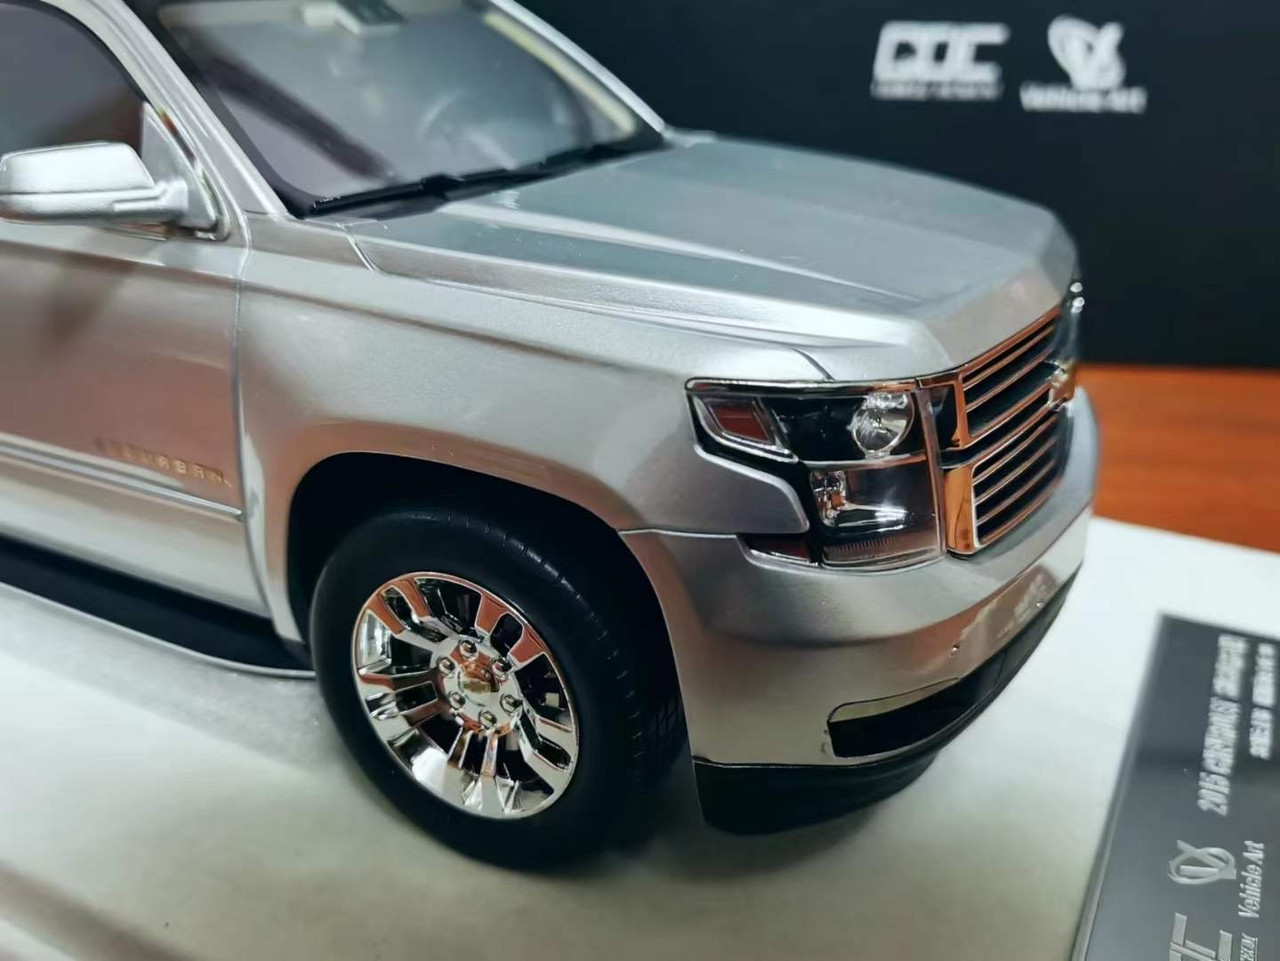 1/18 GOC & Vehicle Art 2015 Chevrolet Chevy Suburban (Silver with Silver Wheels) Resin Car Model Limited 99 Pieces